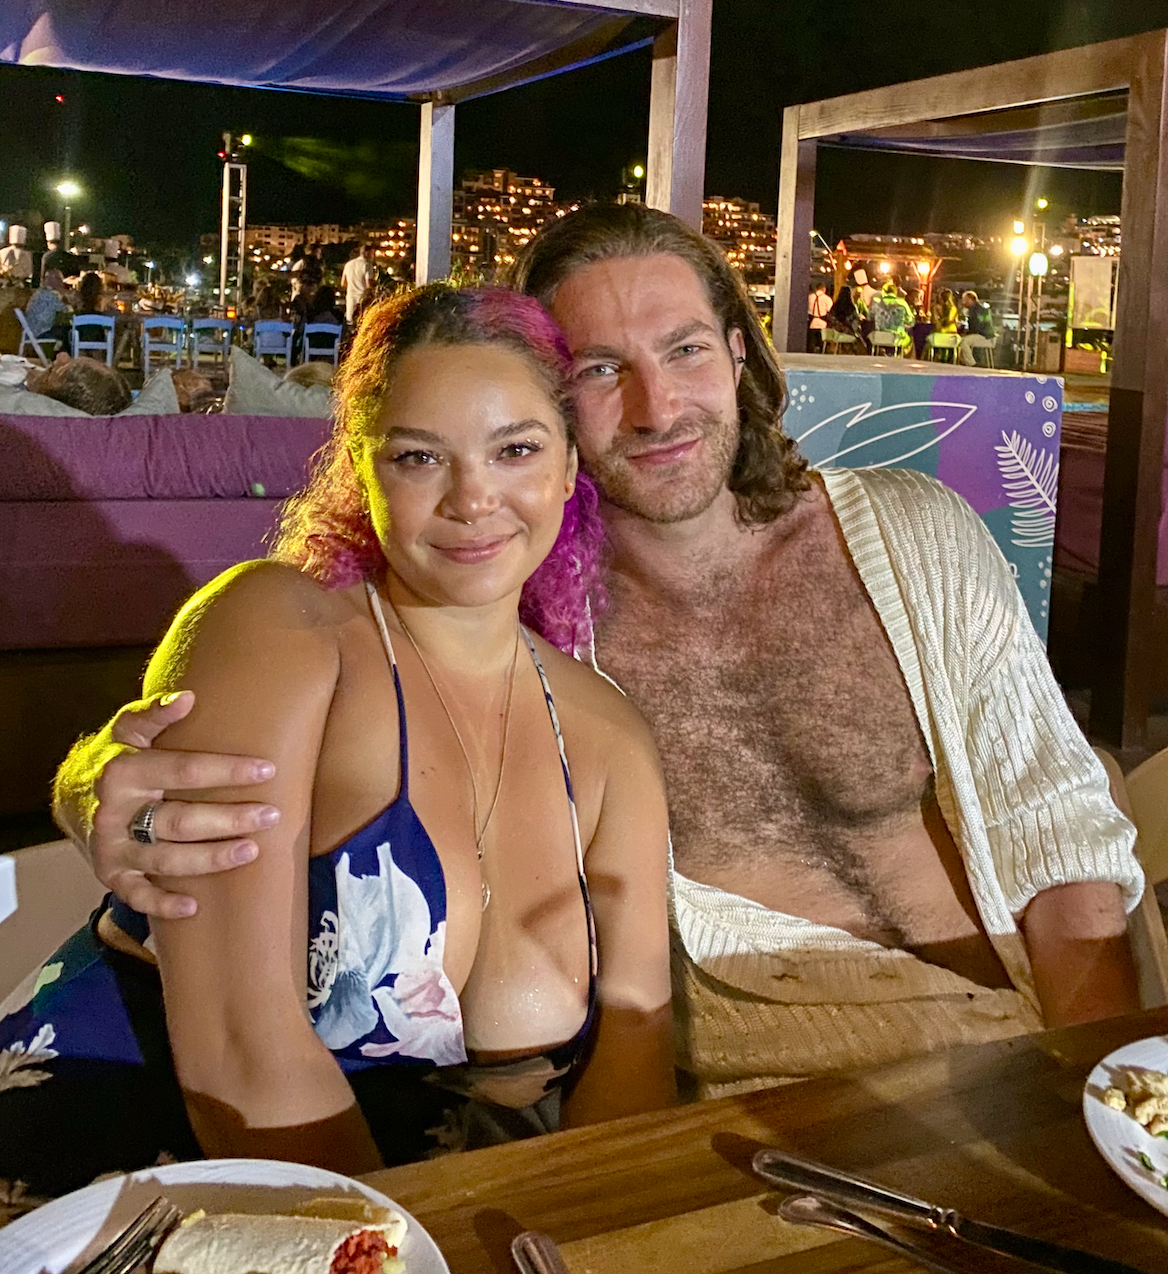 I Went to an LLV Swingers Resort and Had Tons of photo